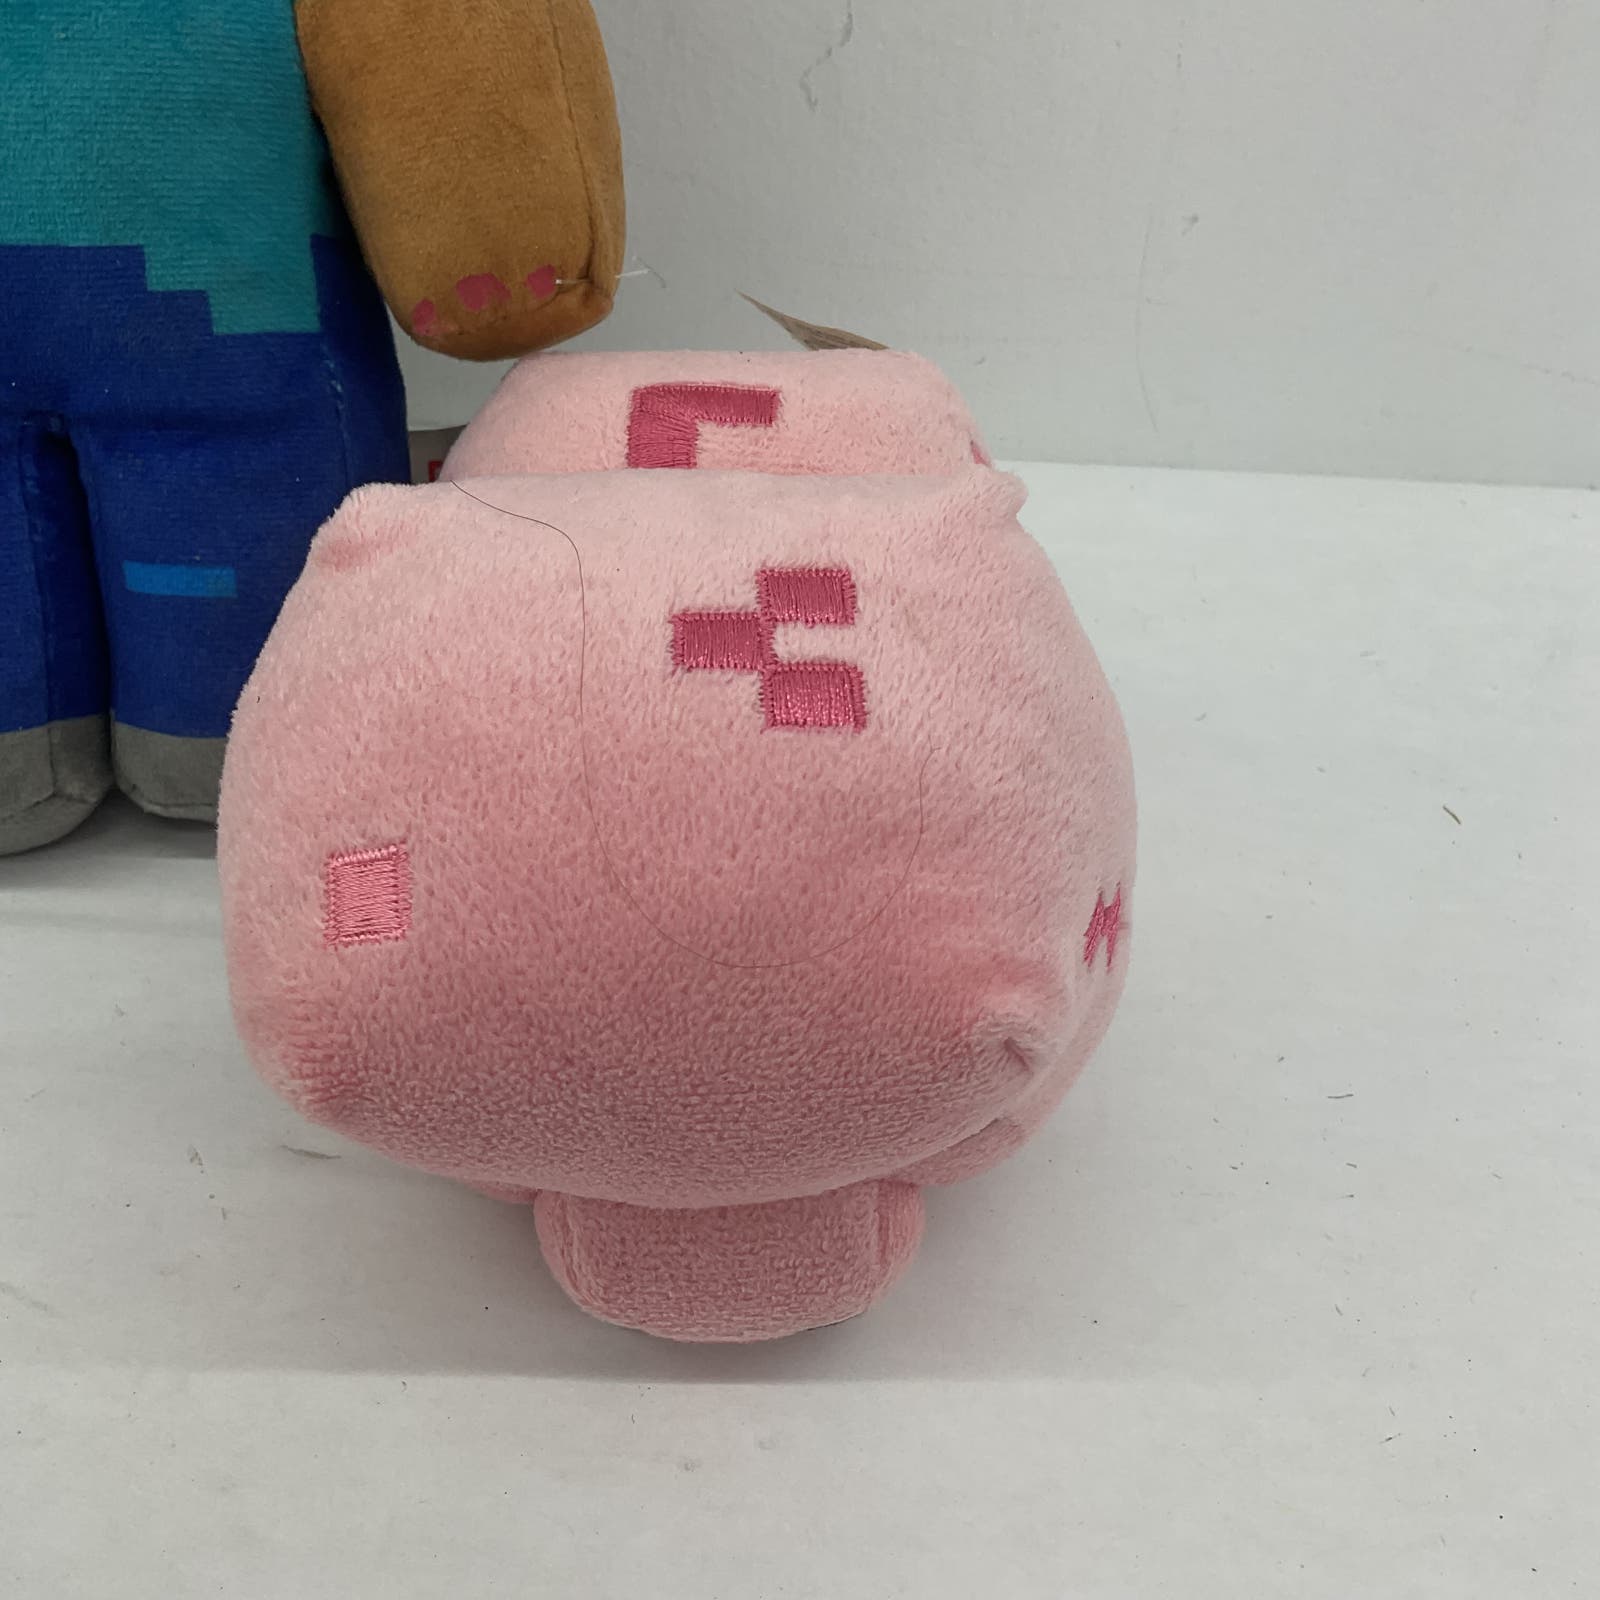 Minecraft Plush Toy in Green Pink Creeper Pig Video Game Plush Lot - Warehouse Toys